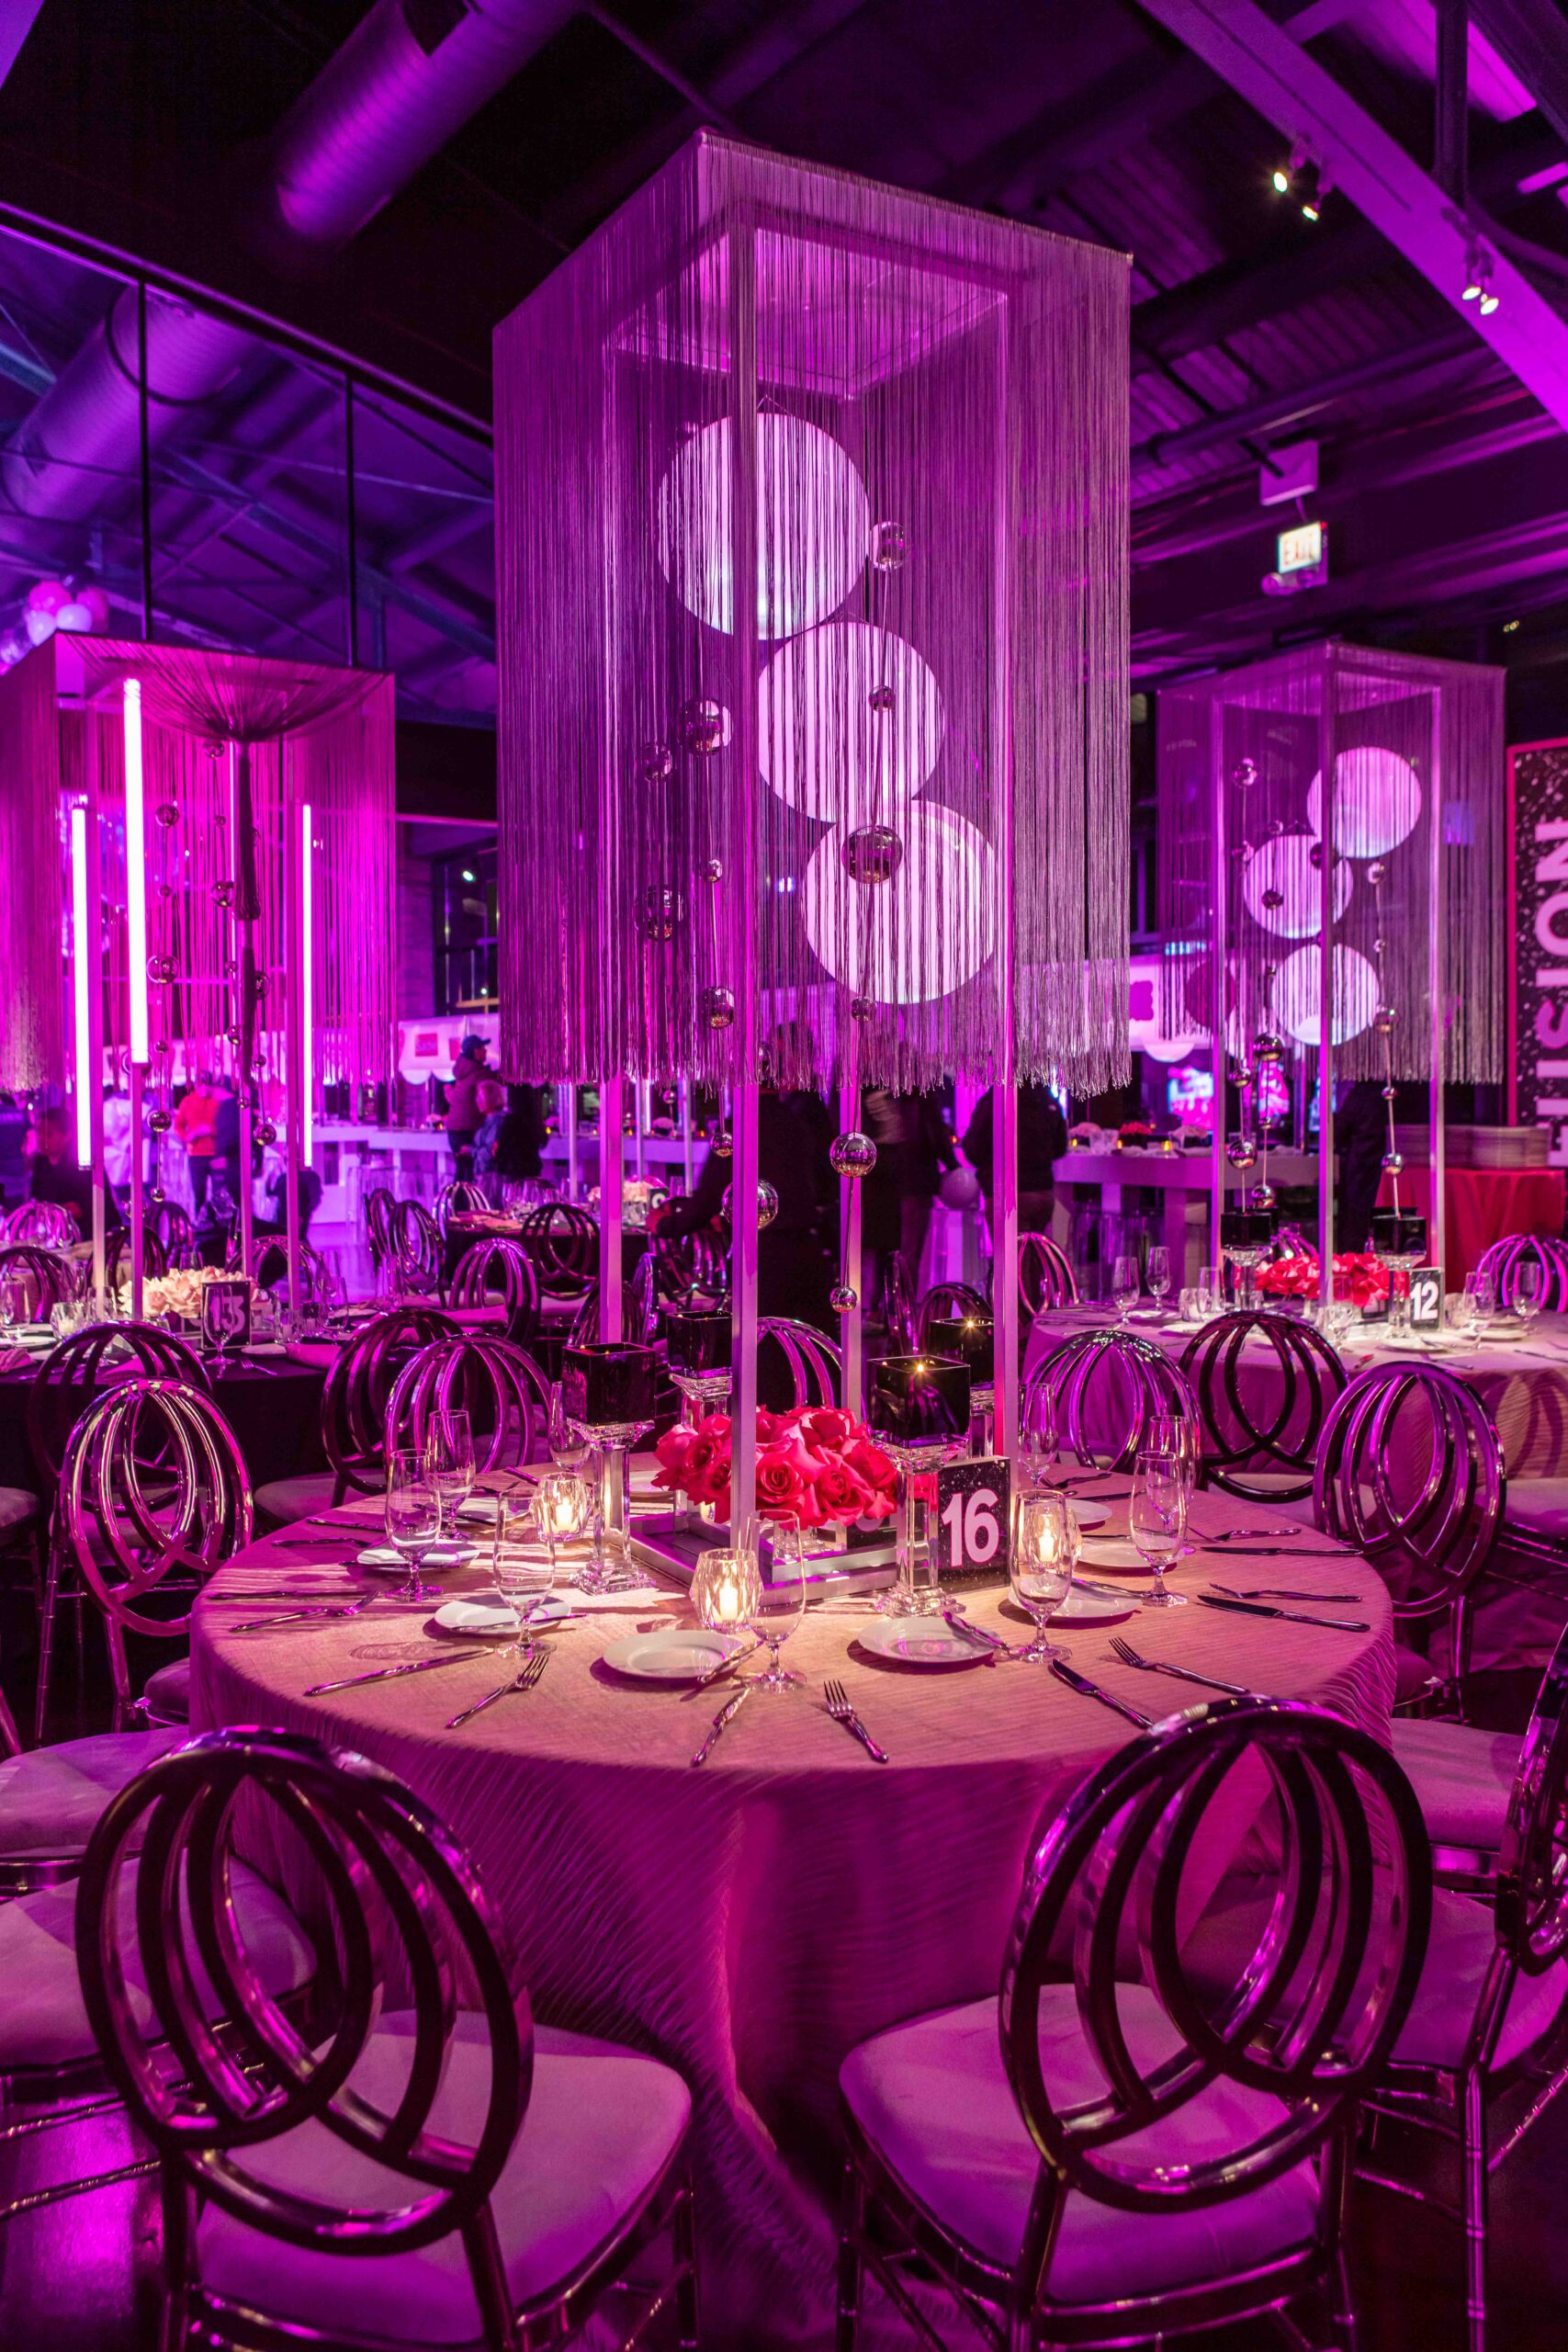 Magenta-themed event space, focusing on a table bathed in golden light, surrounded by glossy gold chairs, with magenta neon lights and unique chandeliers.